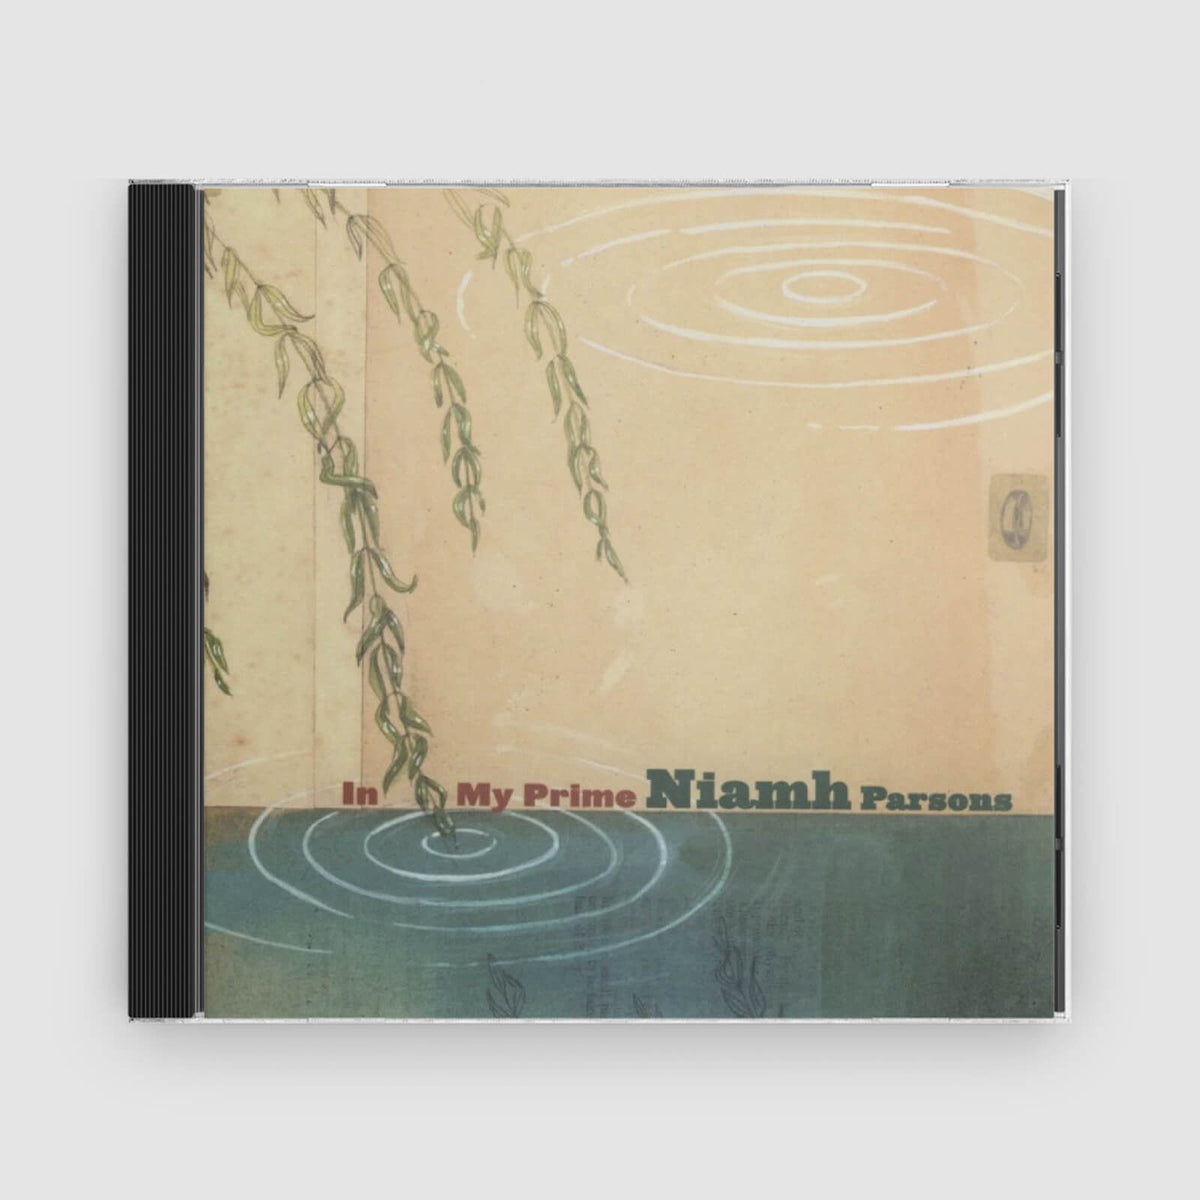 Niamh Parsons : In My Prime